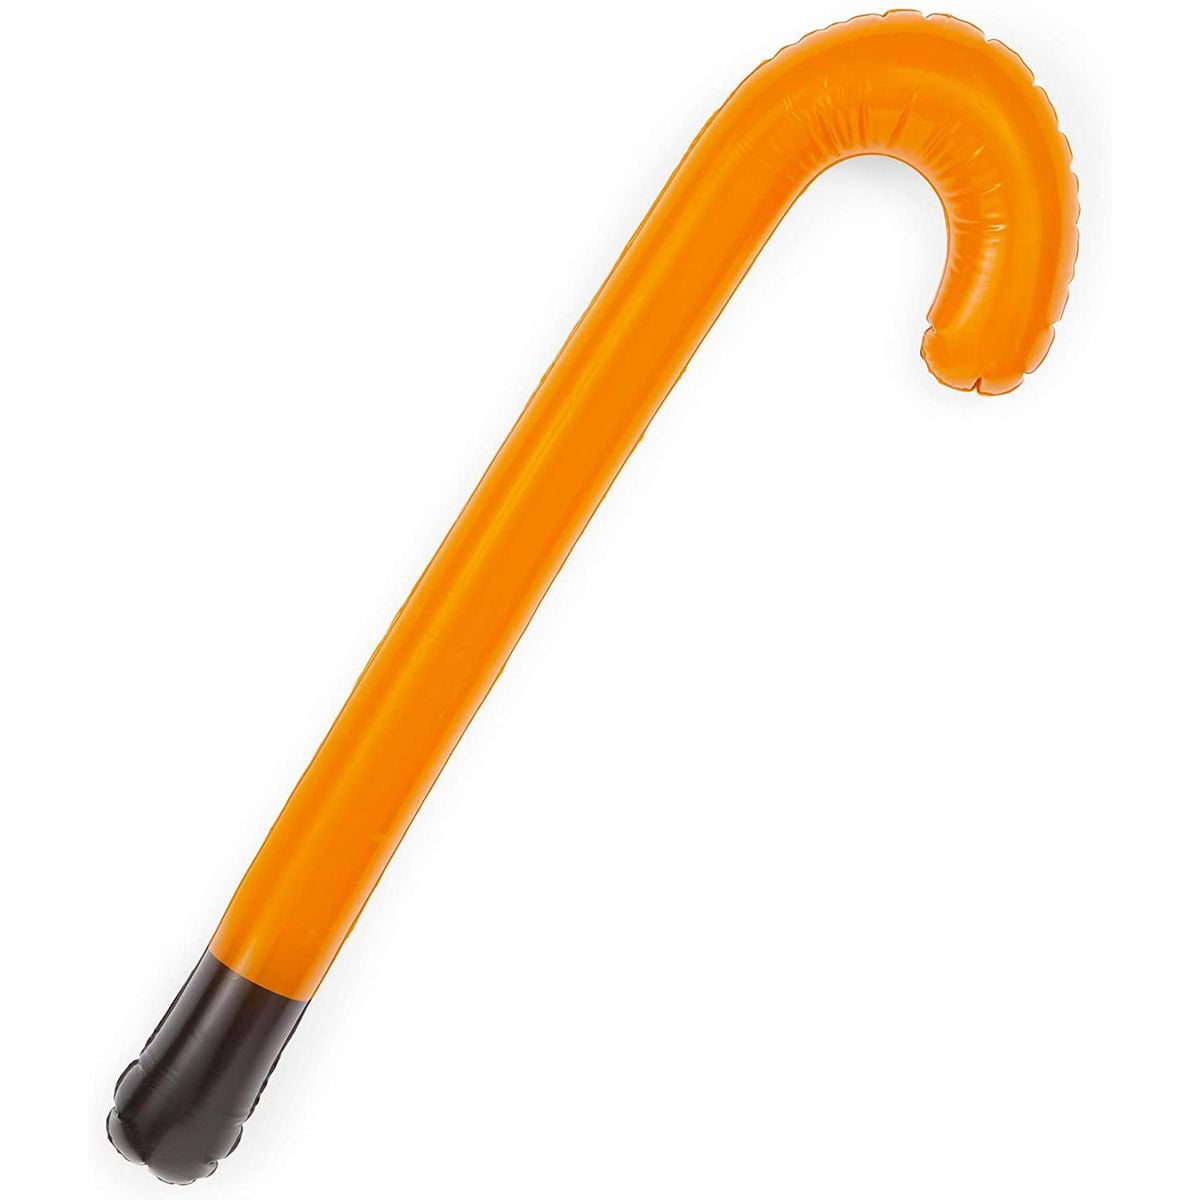 444006 INFLATABLE BLOW UP CANE WALKING STICK GAG NOVELTY GIFT IDEA RETIREMENT 